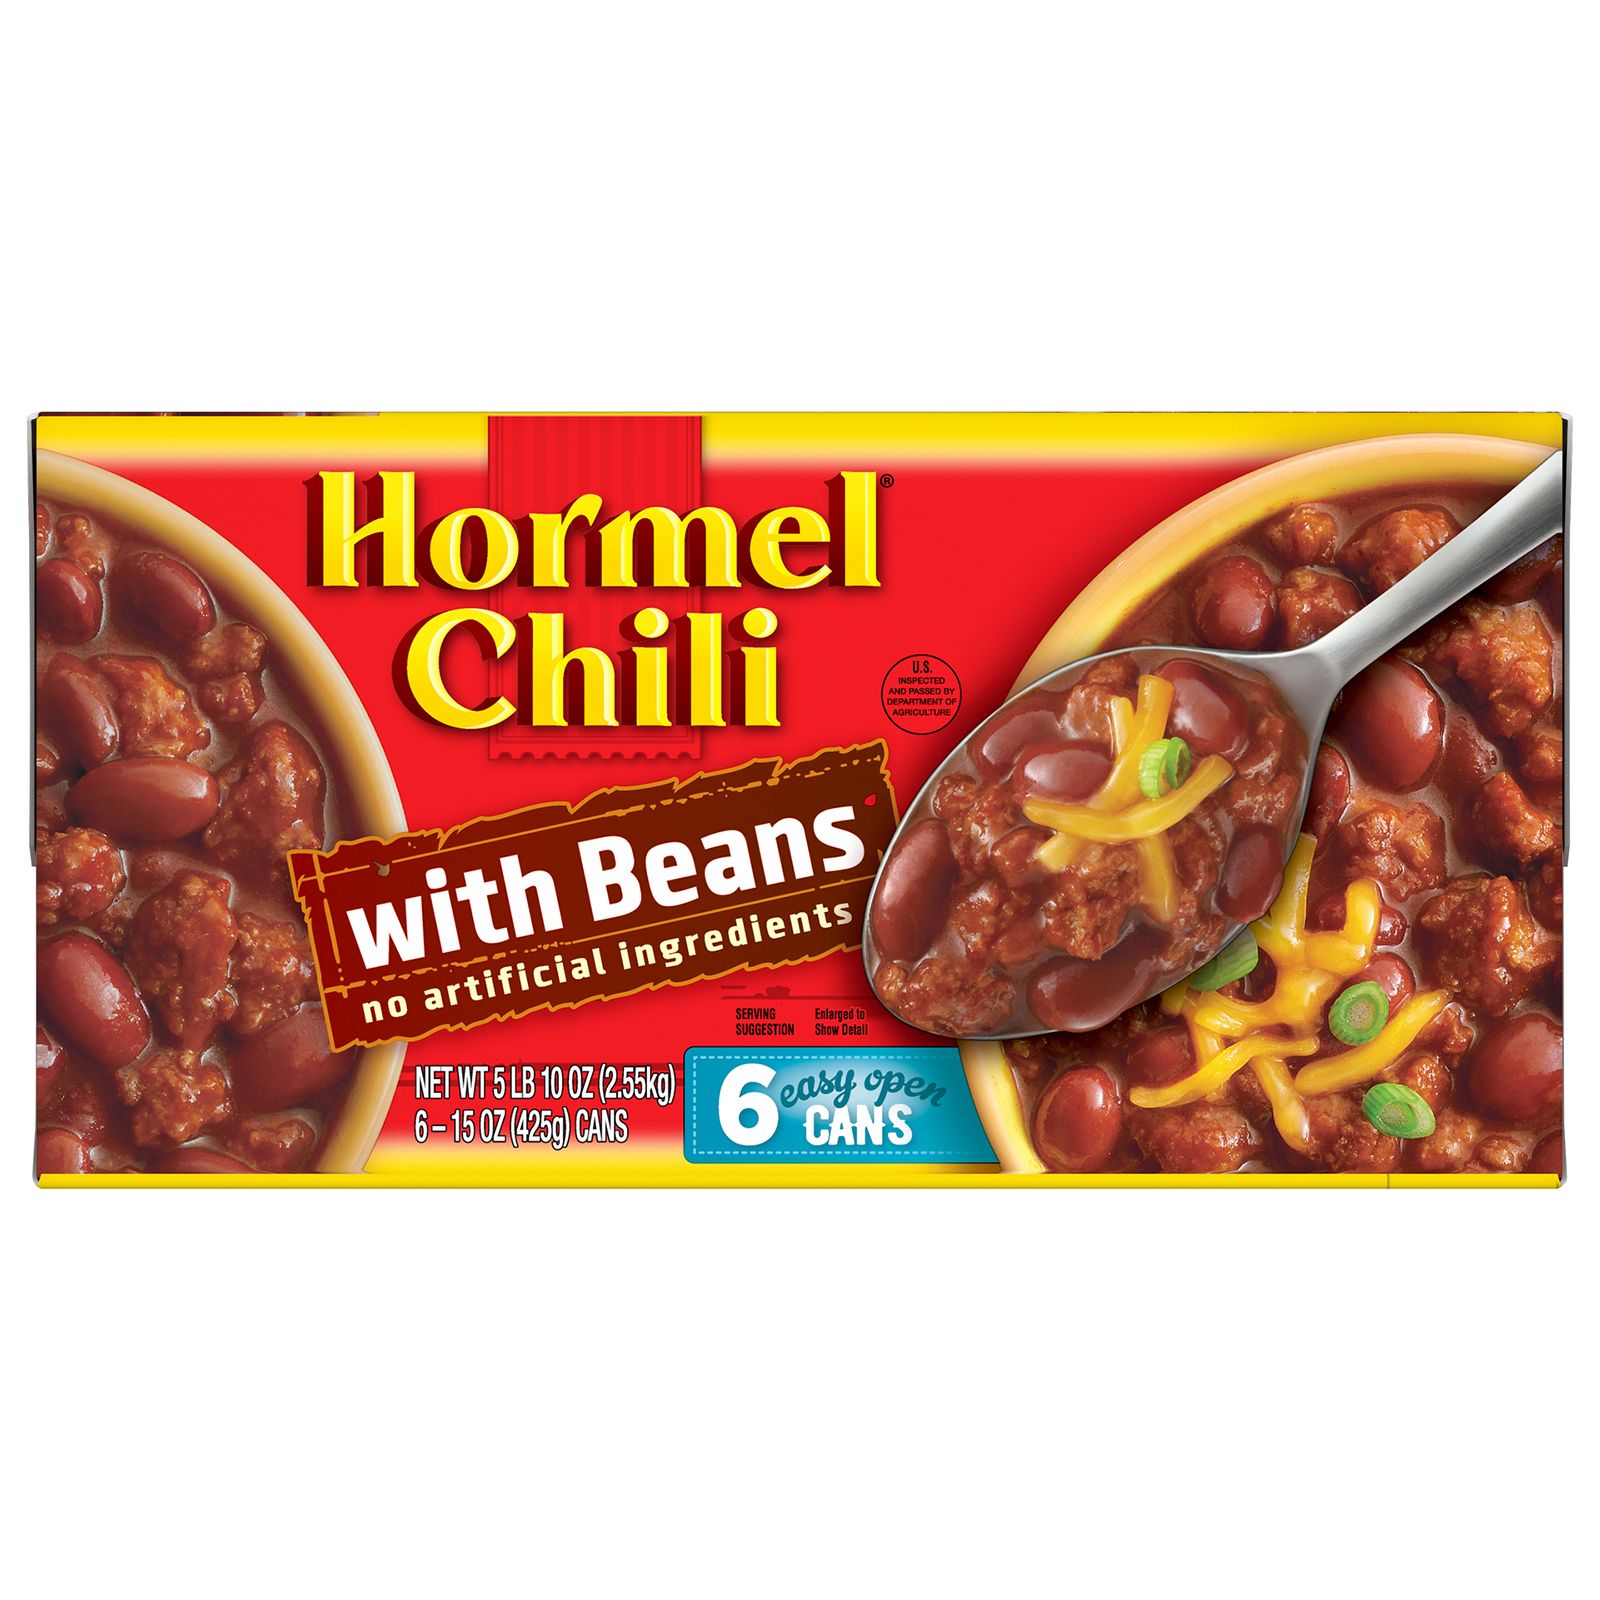 Wendy's Chili with Beans 15 oz